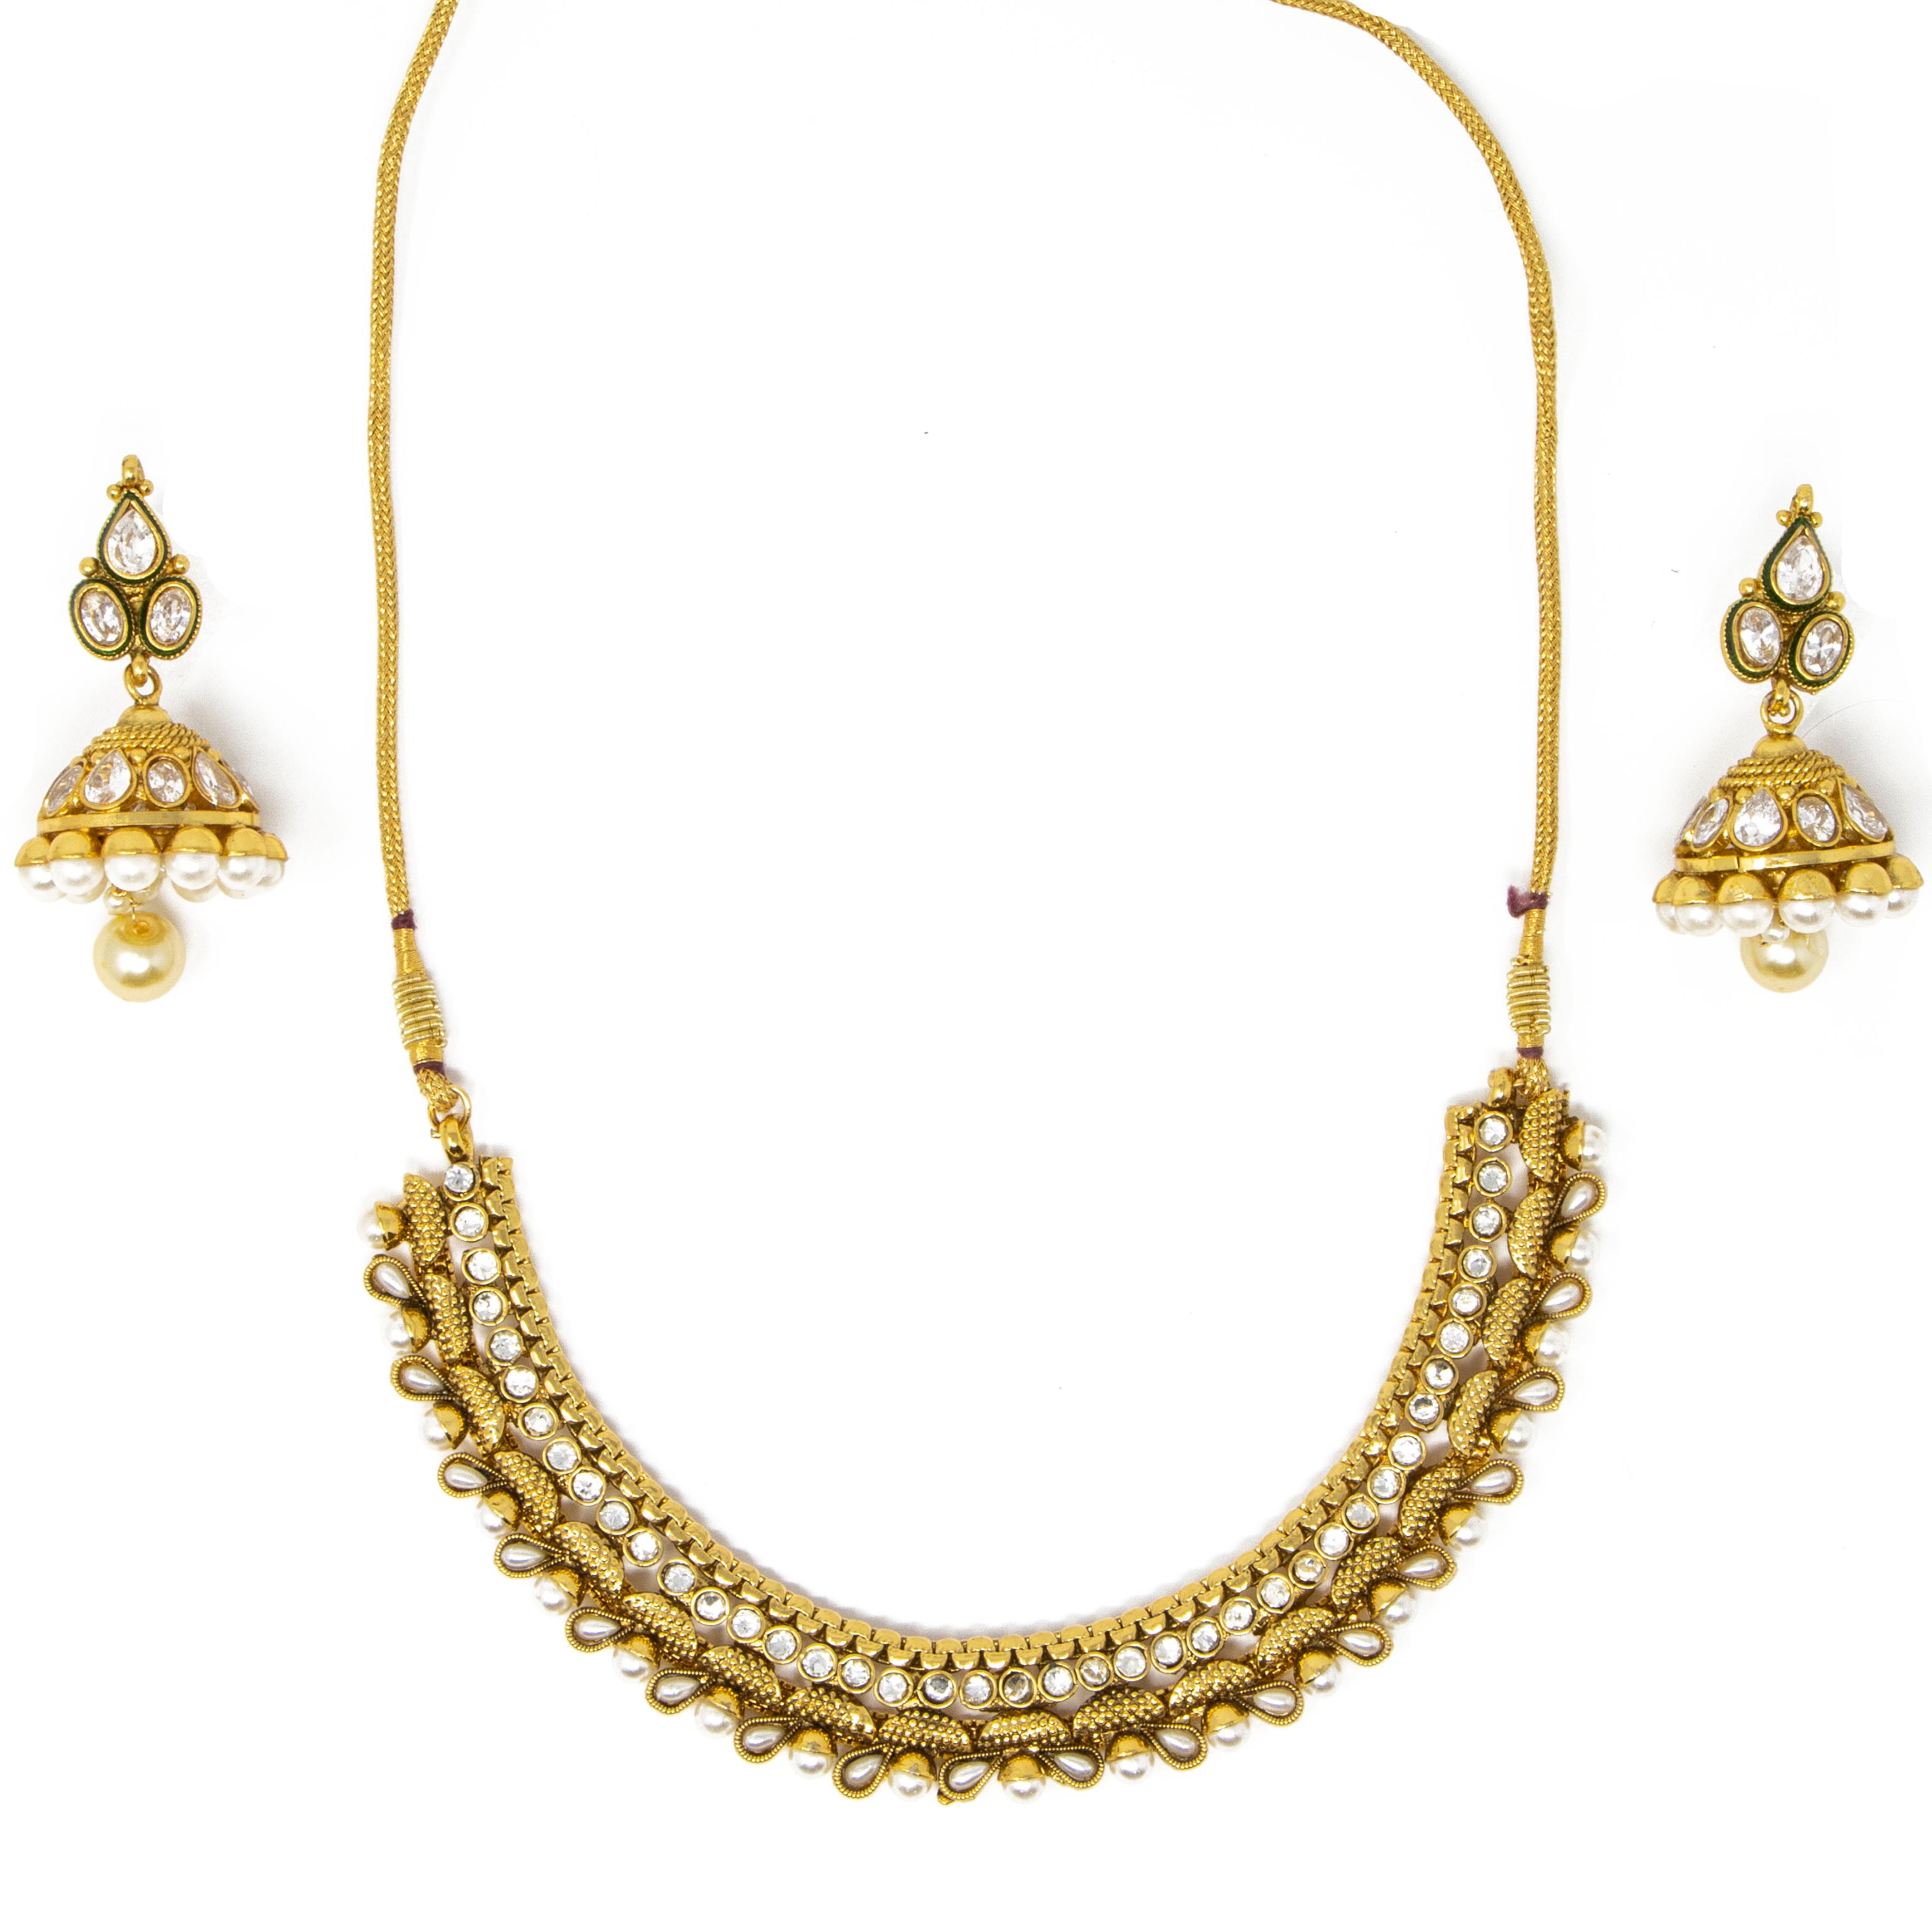 Gold   3 piece set: Necklace with earrings and bindi (forehead piece)